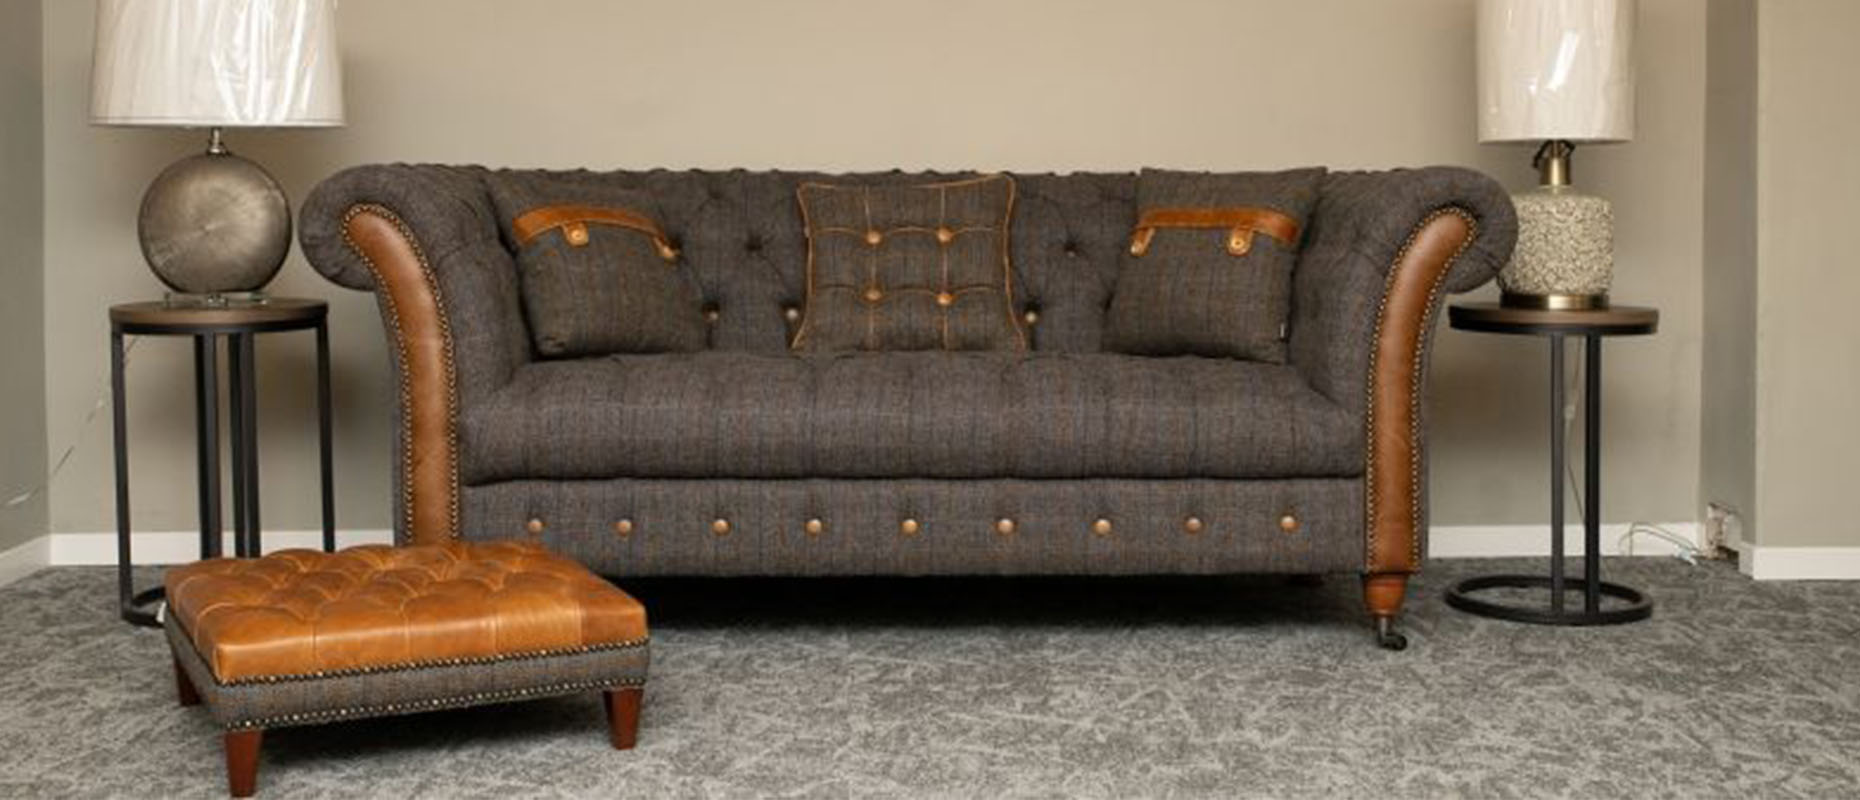 Chester Club sofa collection at Forrest Furnishing